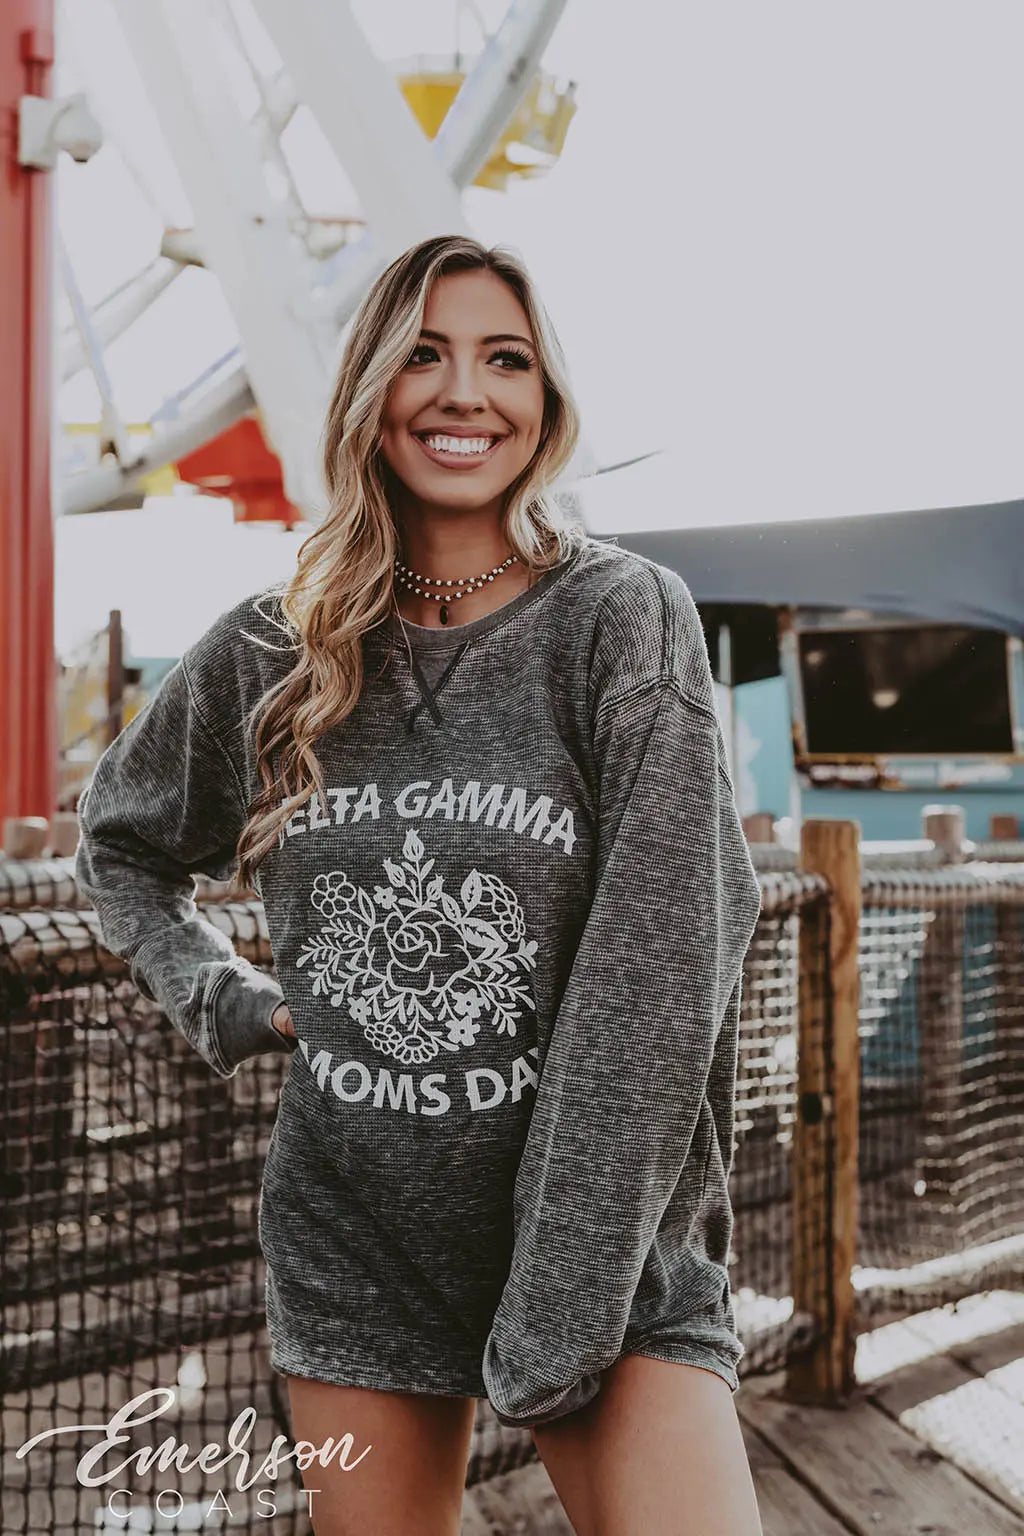 Delta Gamma Moms Day Long Sleeve Thermal Tee